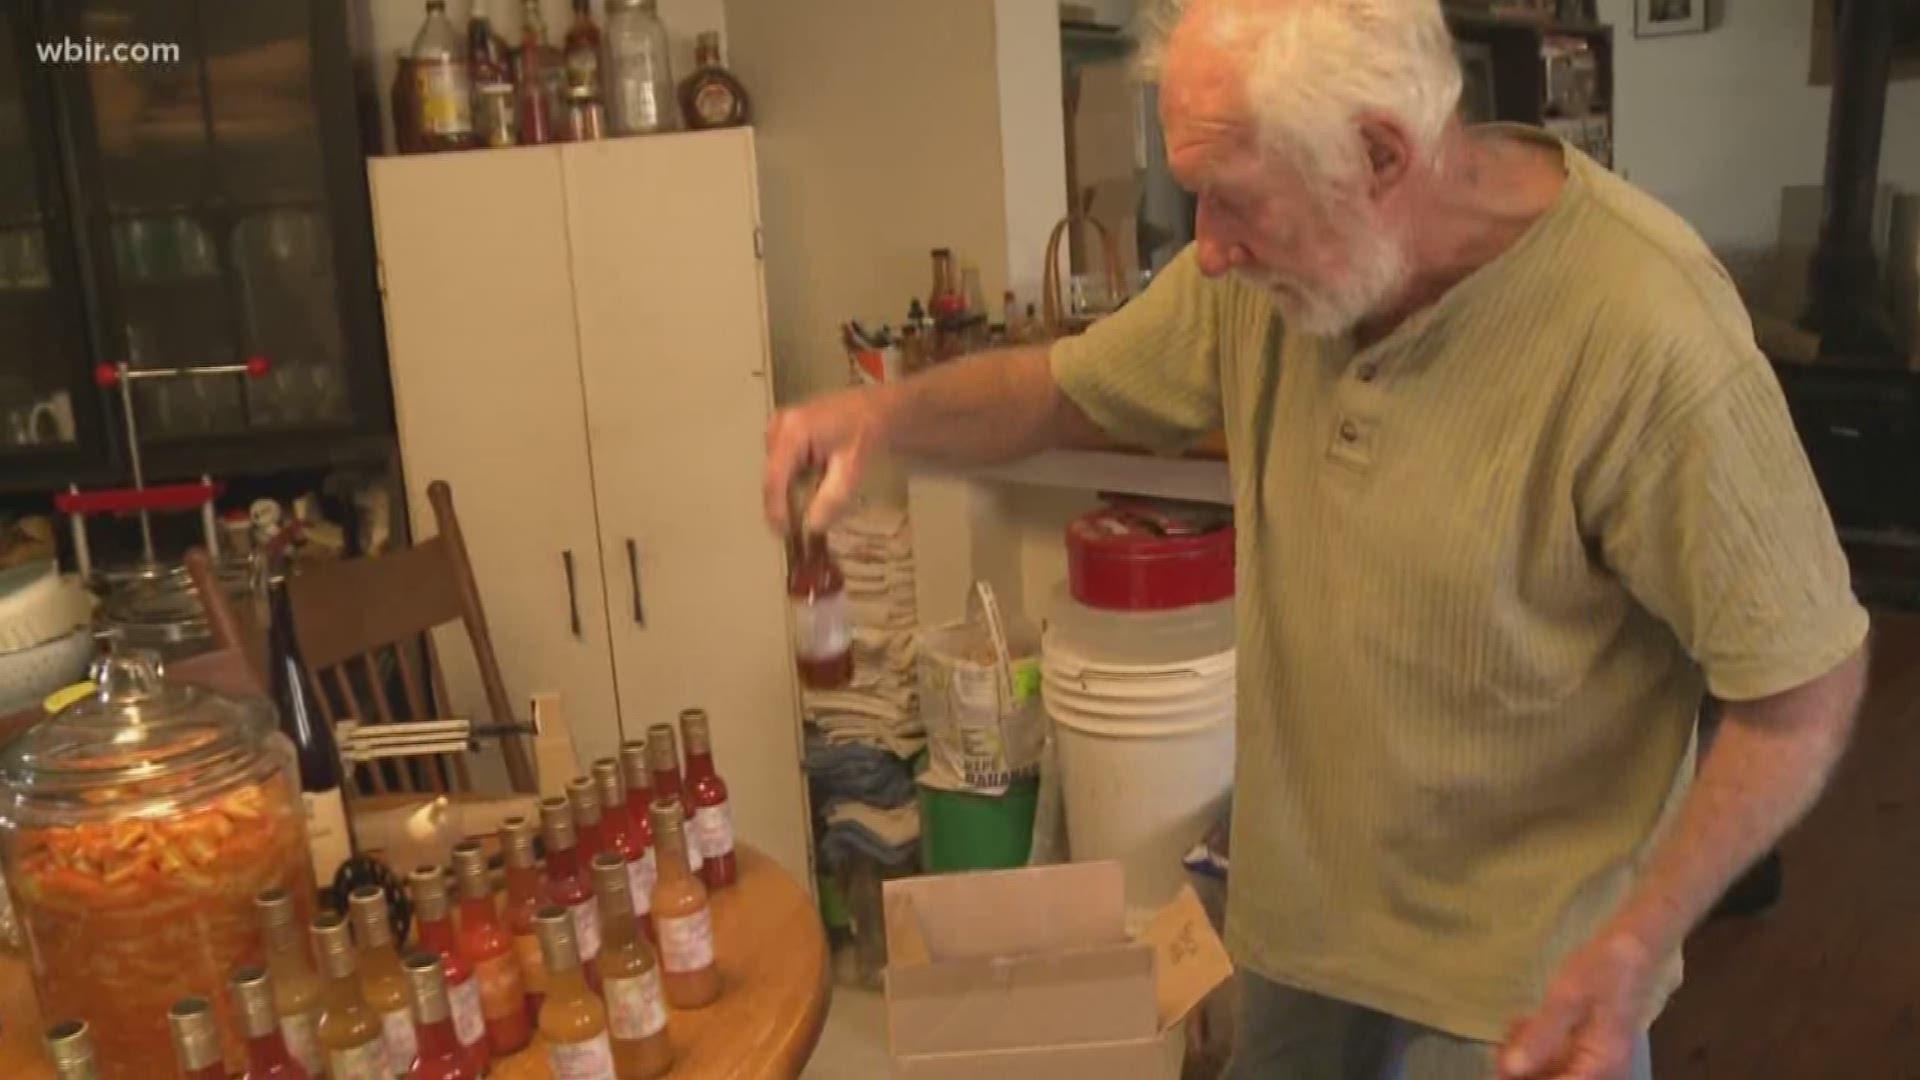 Hot sauce is a love or hate relationship with many people. For one man in East Tennessee, he's made it his life, to love it.